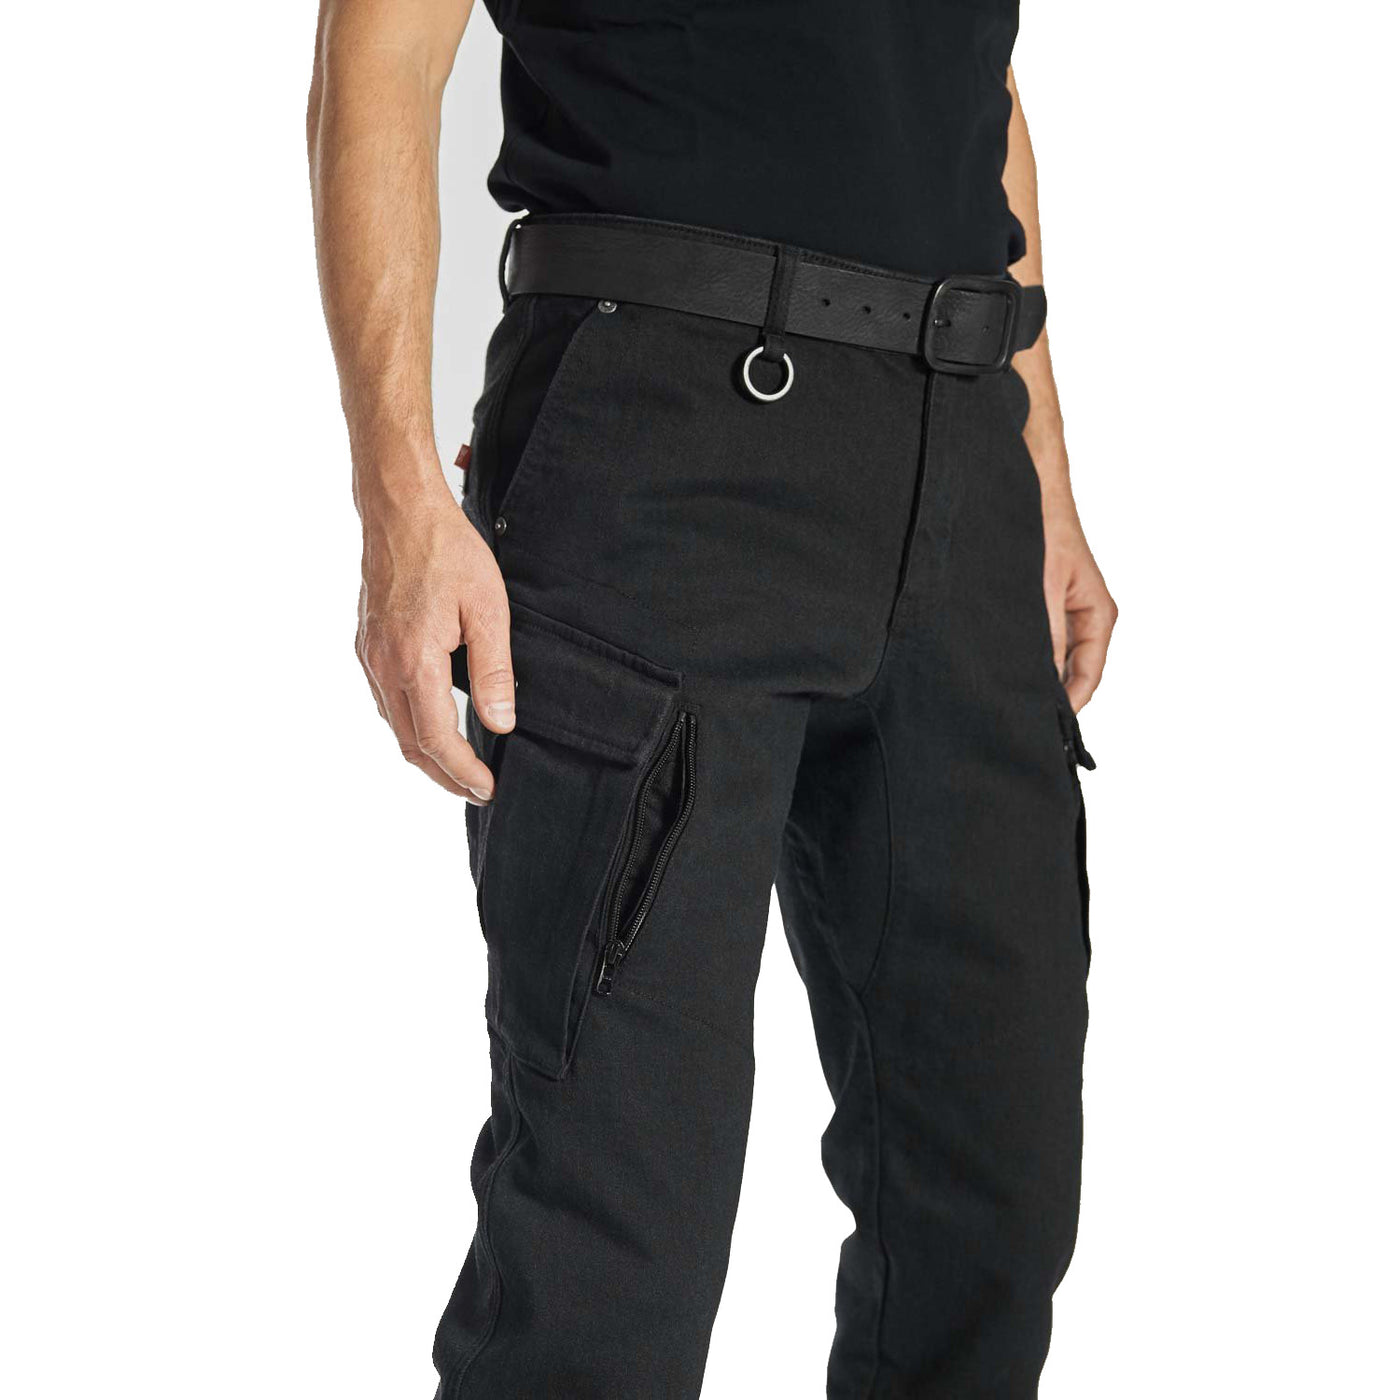 Motorcycle Jeans for Men - Black Chino Style Cordura®,  MARK KEV 01